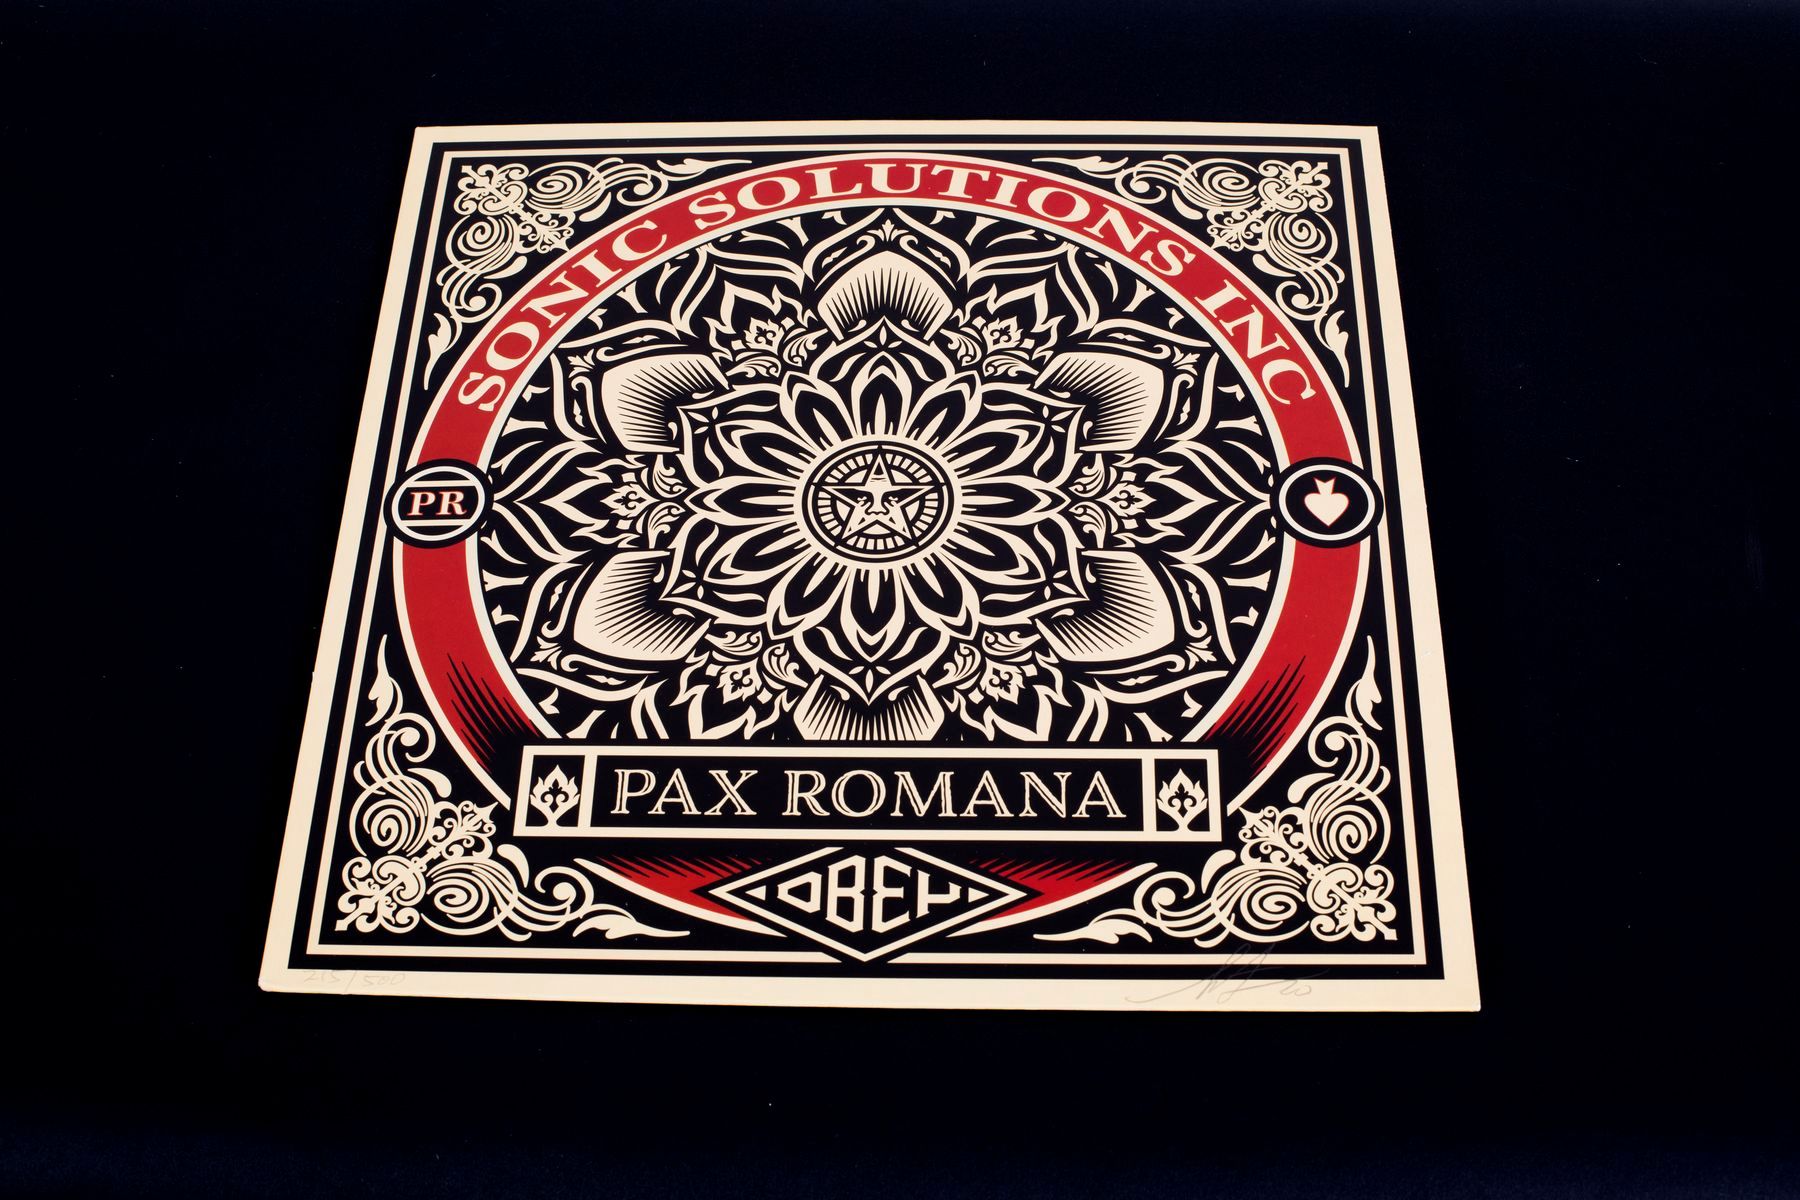 Null OBEY 

Pax Romana, 2020

Vinyl signed and numbered 215/250

33x33 cm